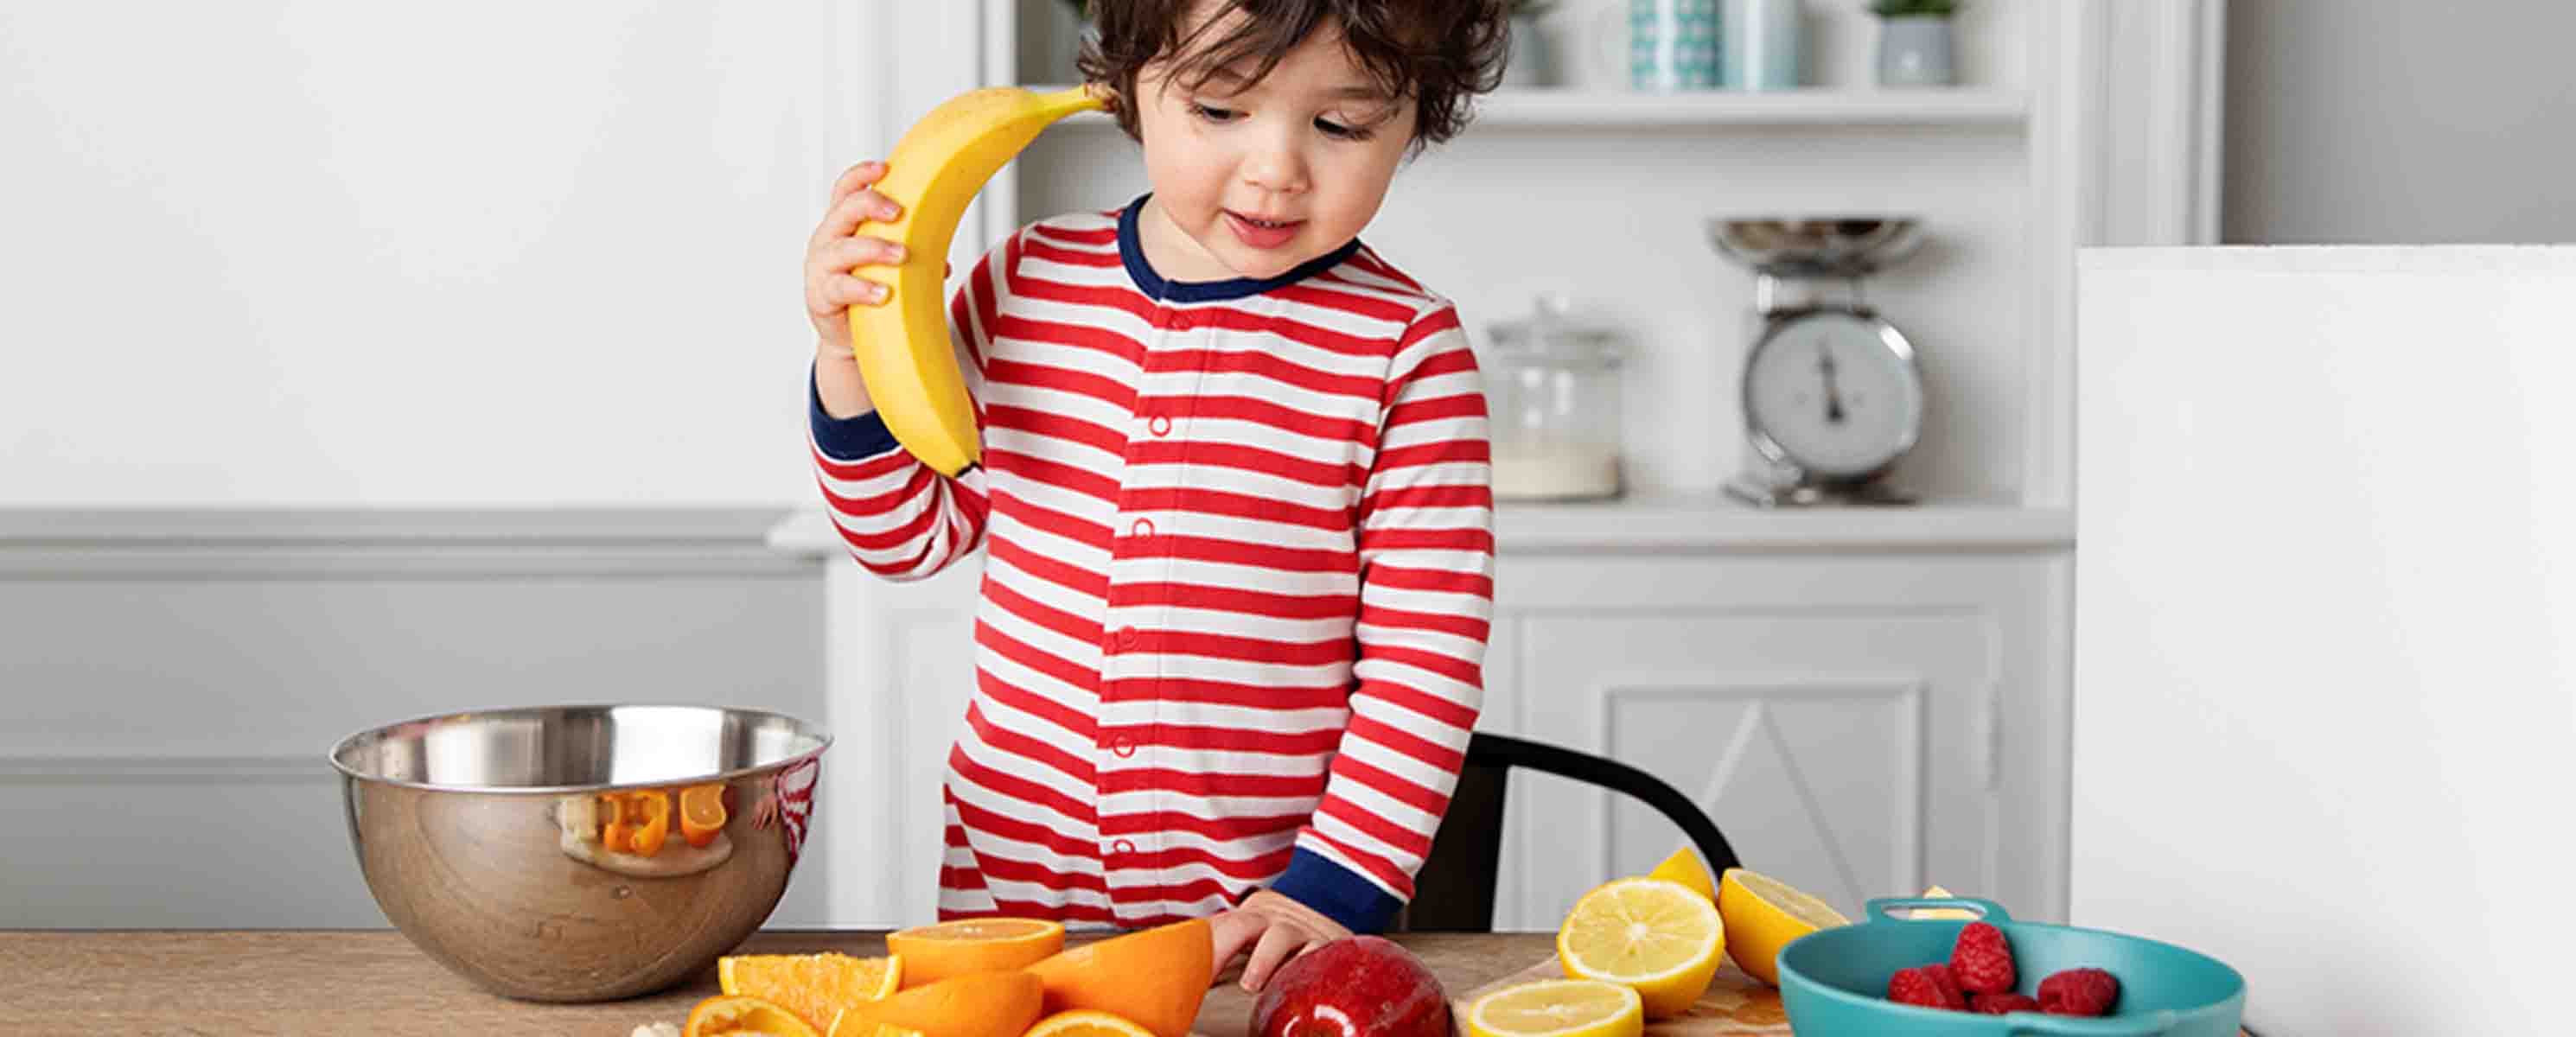 Toddler playing with fruit at a table